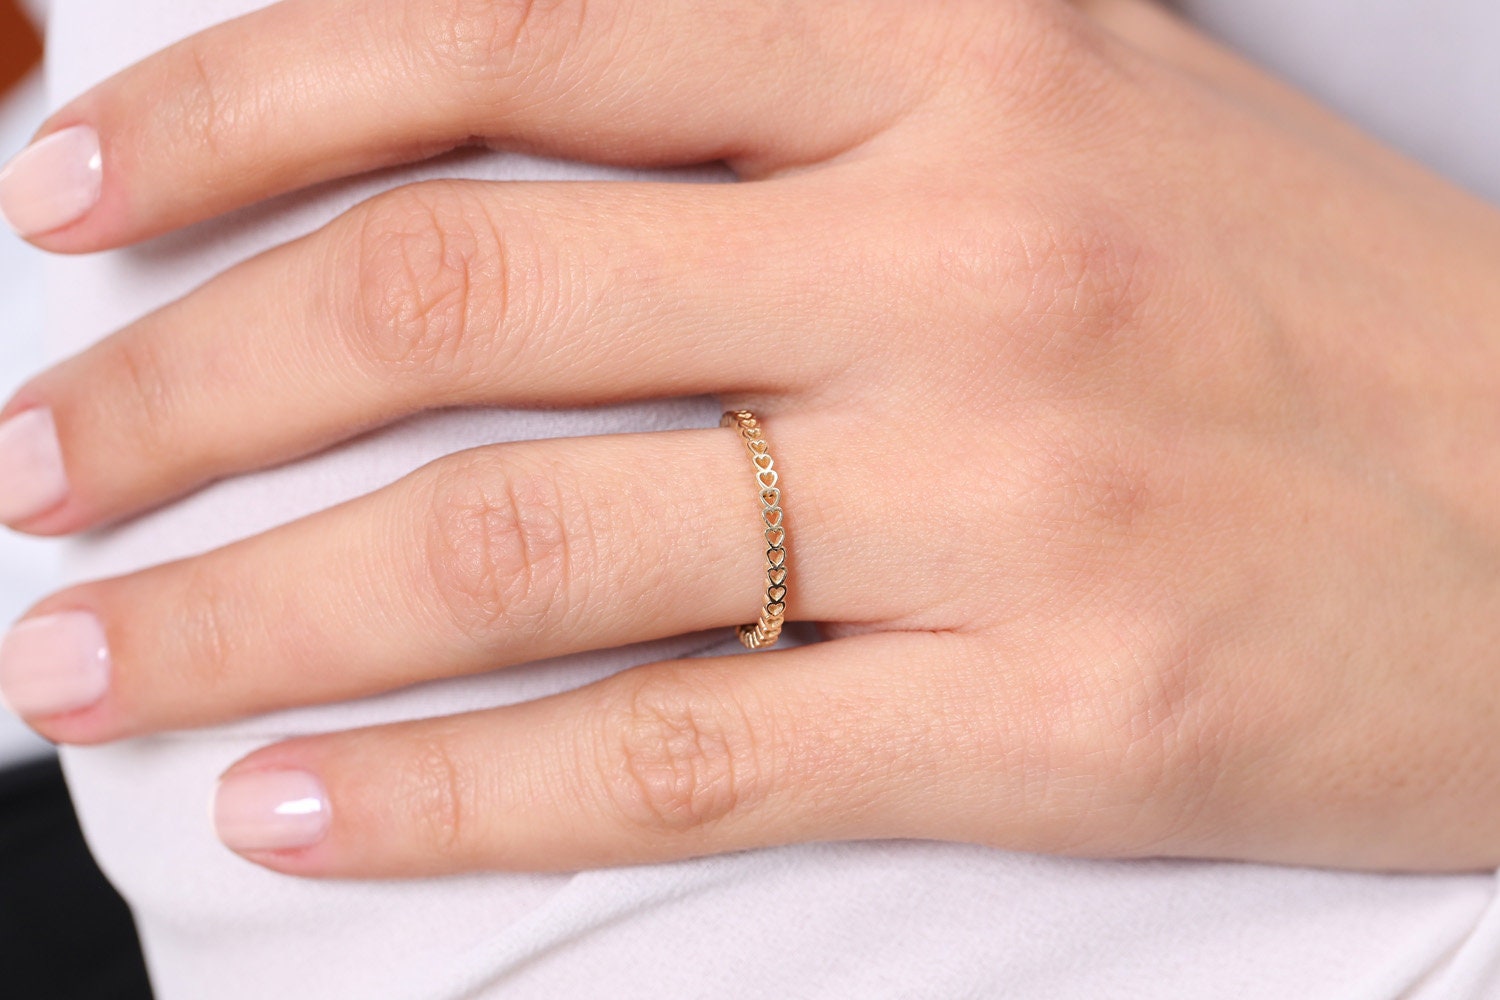 Jewel Connection Beautiful Simple Solid Heart Stackable Ring in 14K Yellow Gold for Women